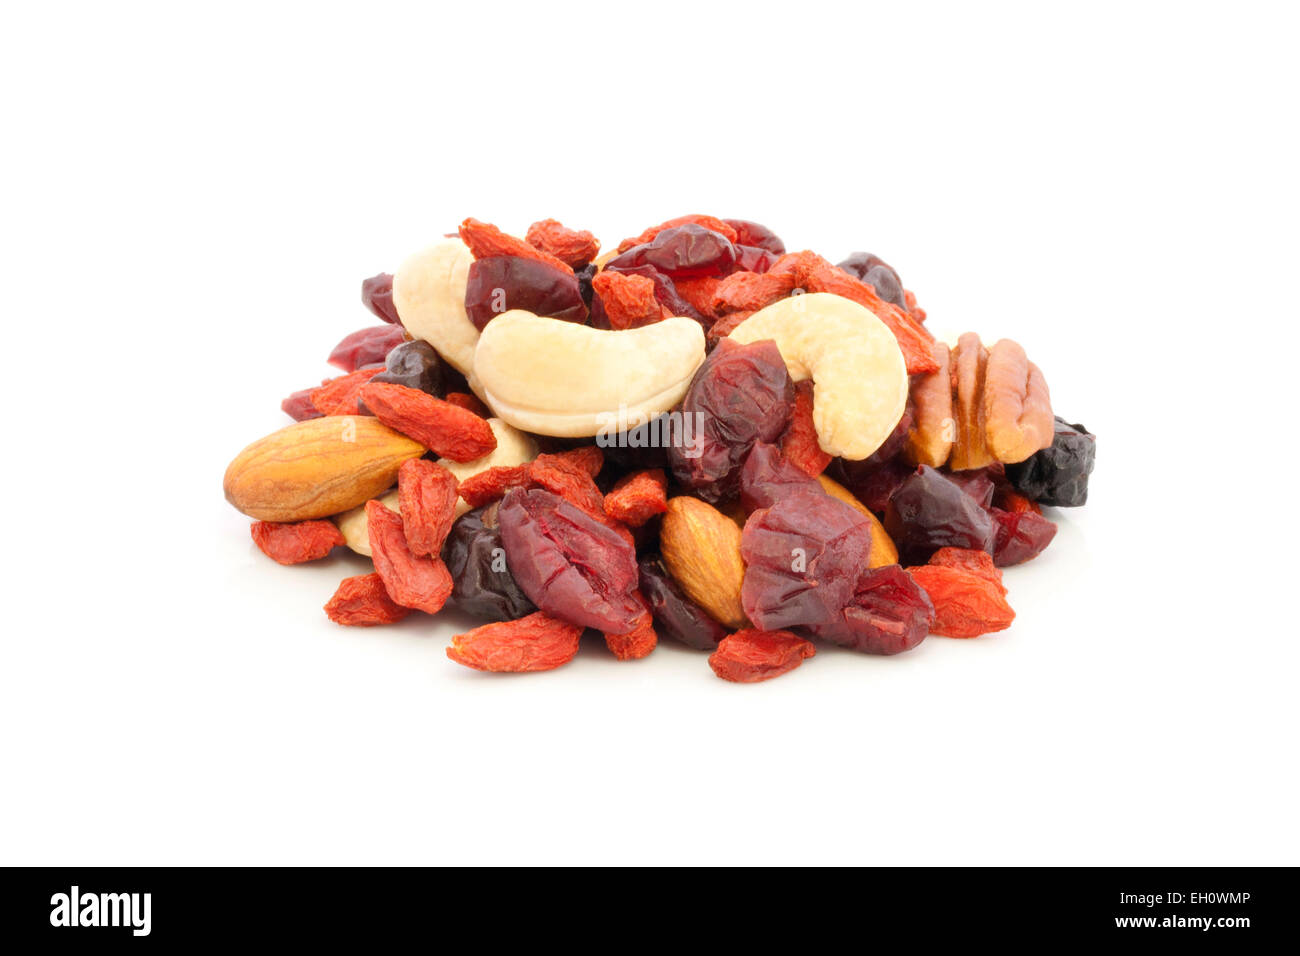 Healthy snack of dried fruits on white background. Stock Photo